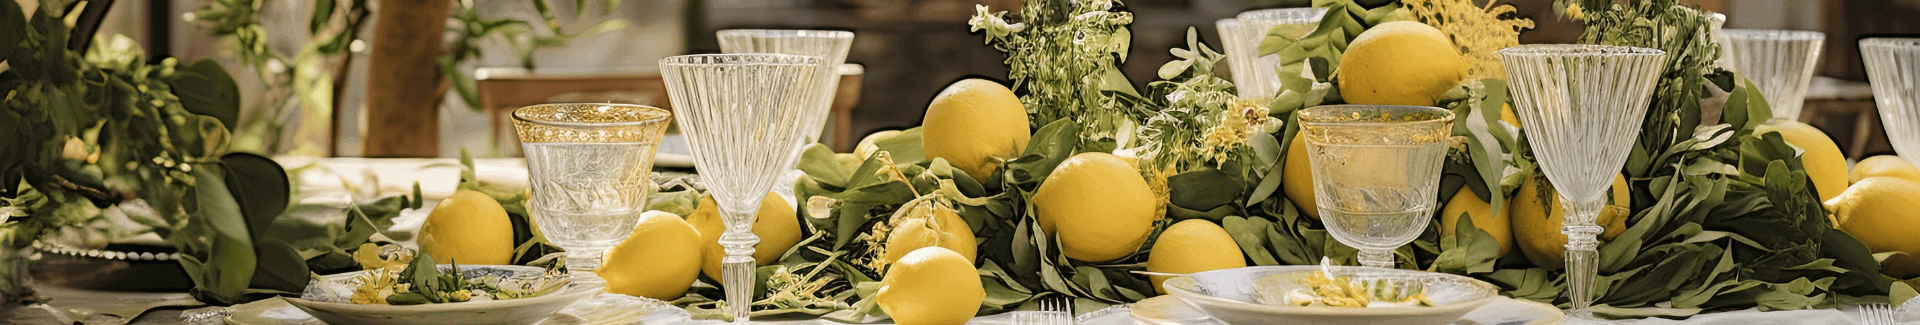 A table set at an outdoor restaurant, decorated with Lemons.